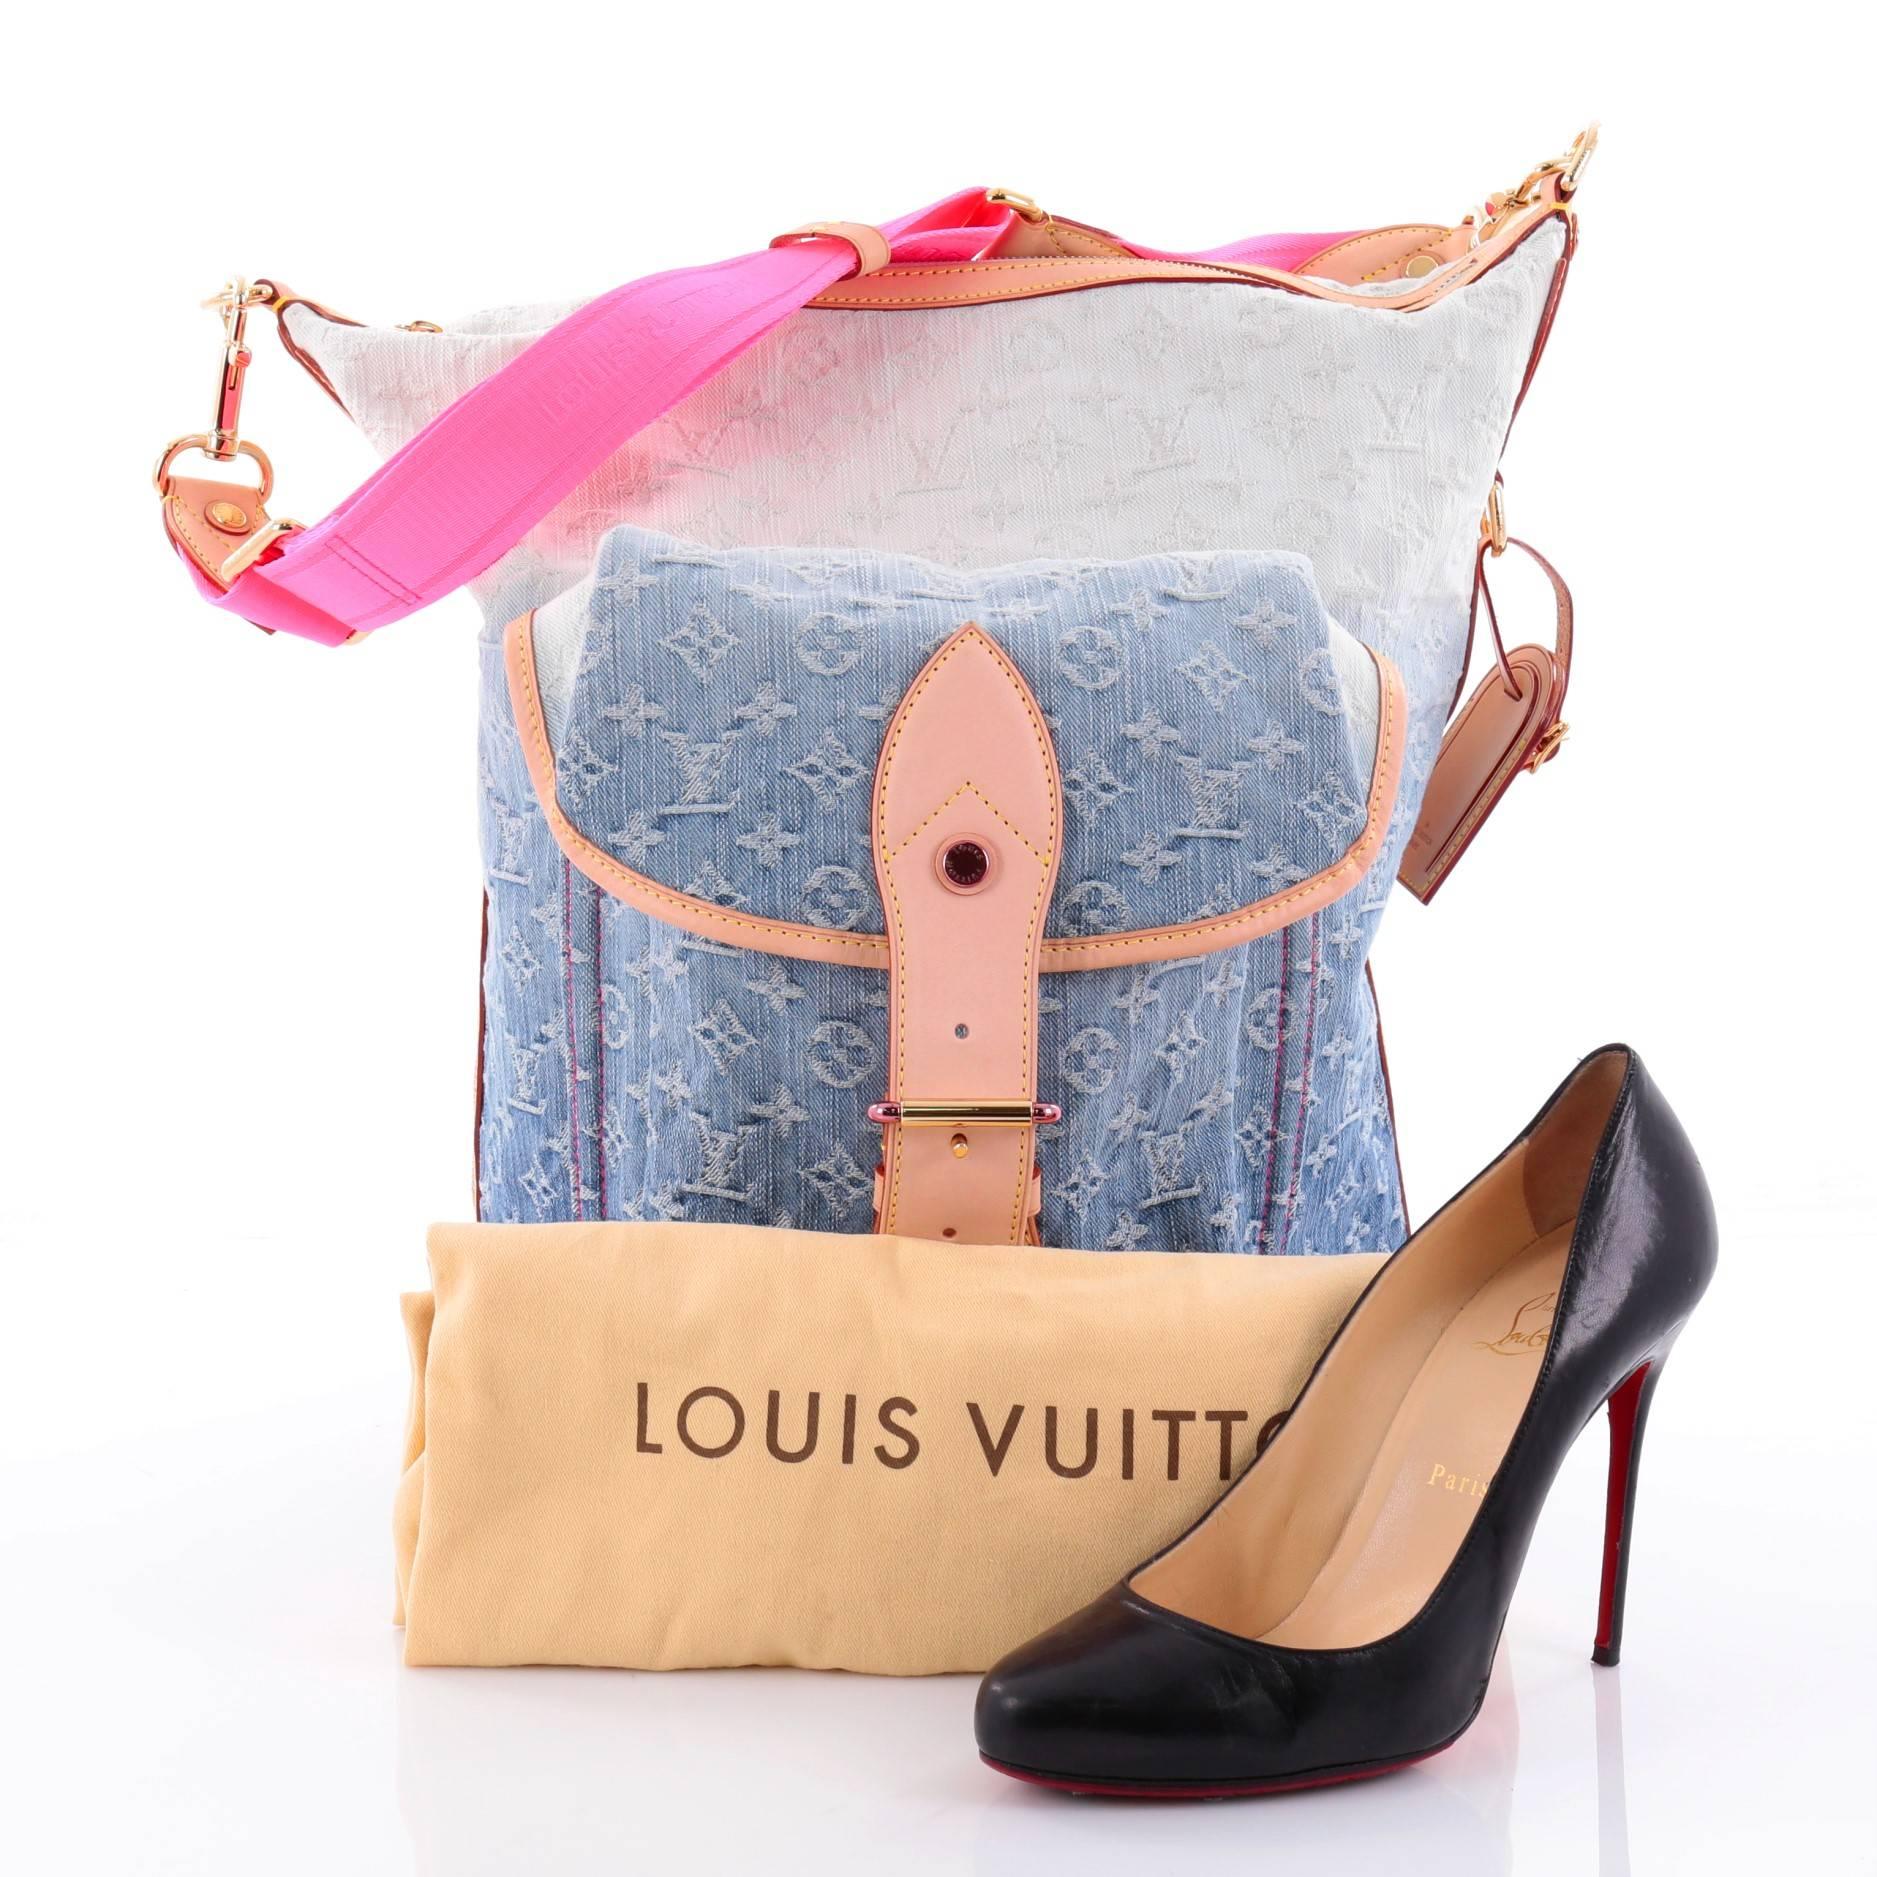 This authentic Louis Vuitton Sunburst Handbag Denim PM from the brand's 2010 Spring/Summer collection will surely add a beautiful splash of color to any ensemble. Crafted in gradient blue monogram denim, this stylish bag features a flat nylon